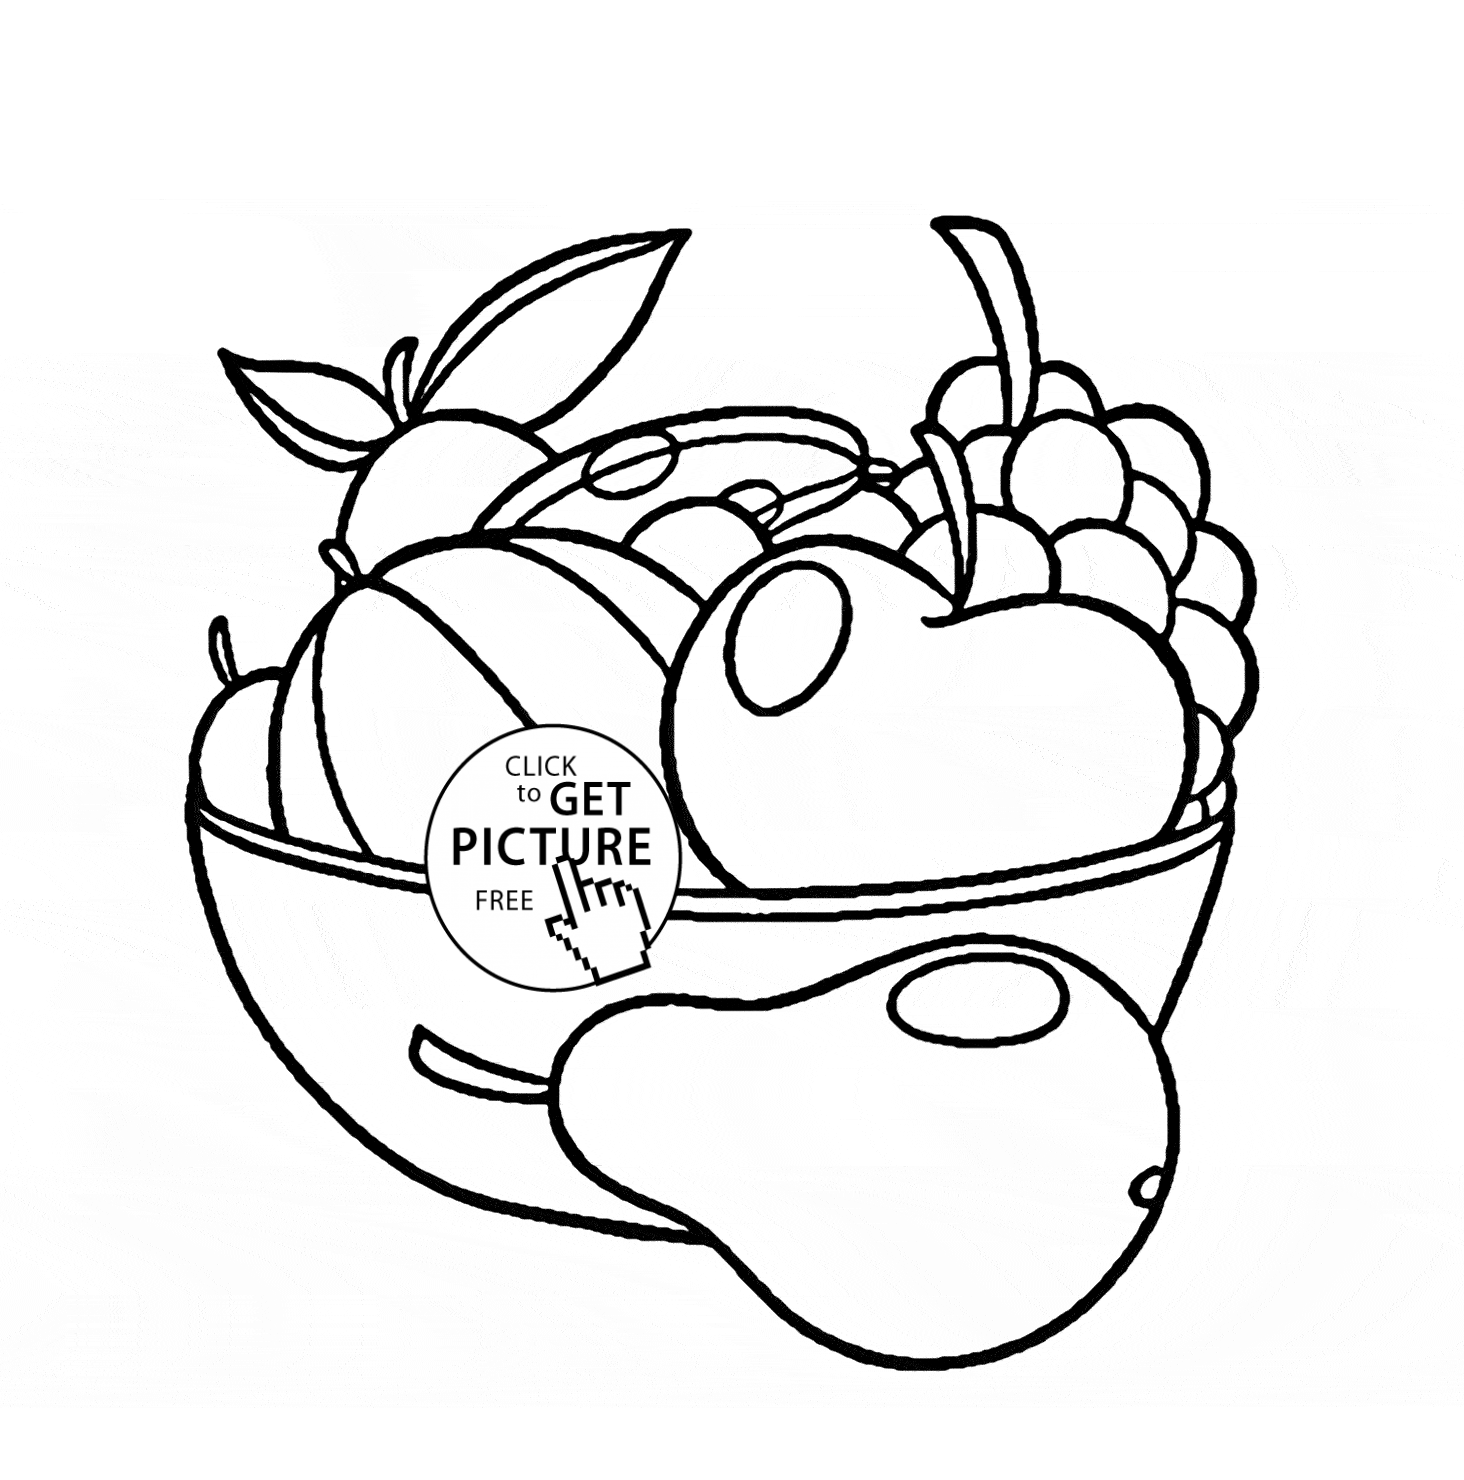 Free Coloring Pages Of A Bowl Of Fruit, Download Free Coloring ...